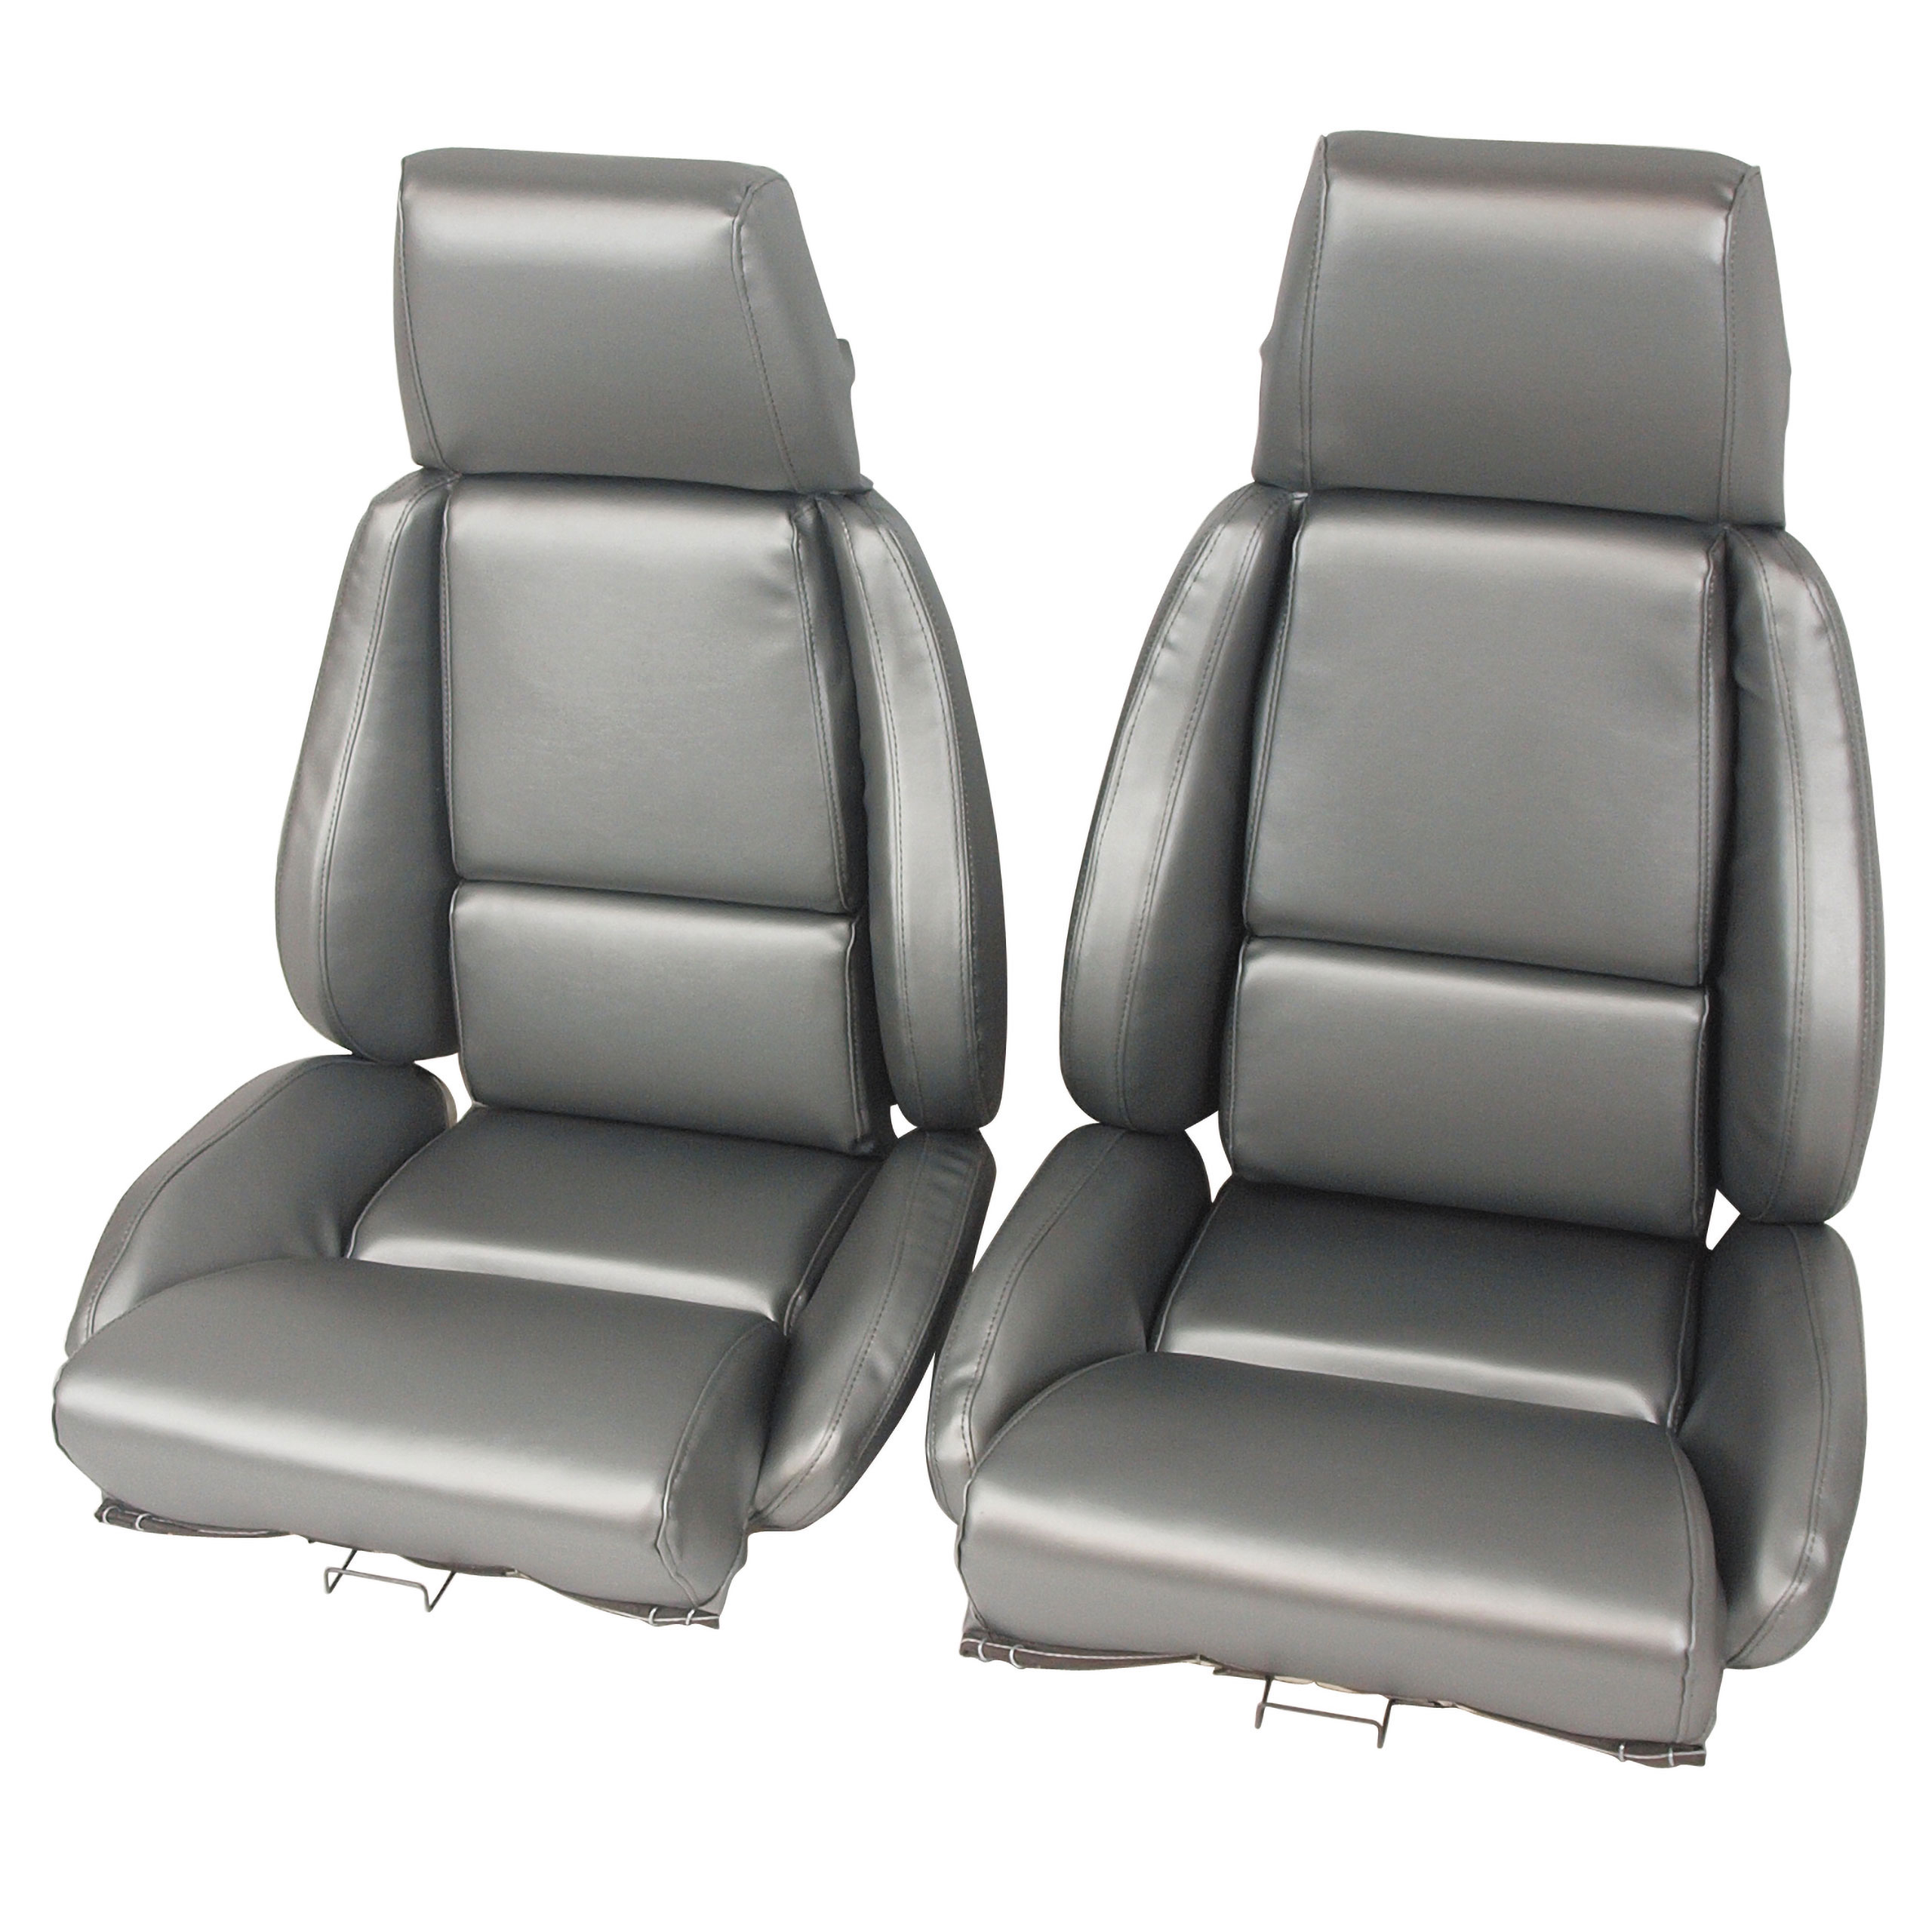 84-87 Corvette C4 468469 OE Style 100% Leather Standard Seat Covers W/O Perforated Inserts Gray CA-468769 